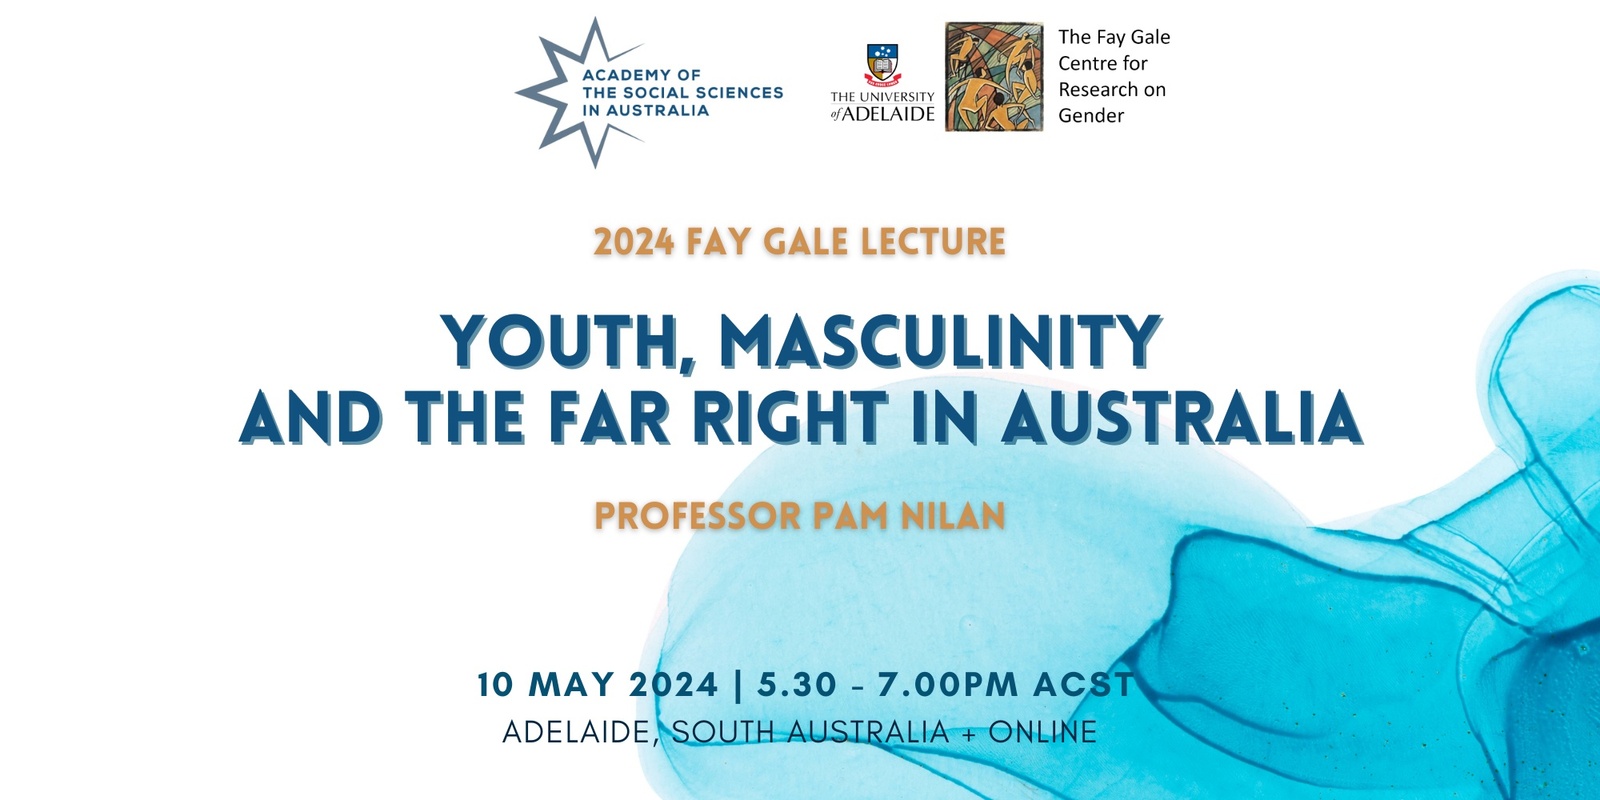 Banner image for 2024 Fay Gale Lecture 'Youth, Masculinity and the Far Right in Australia' with Professor Pam Nilan